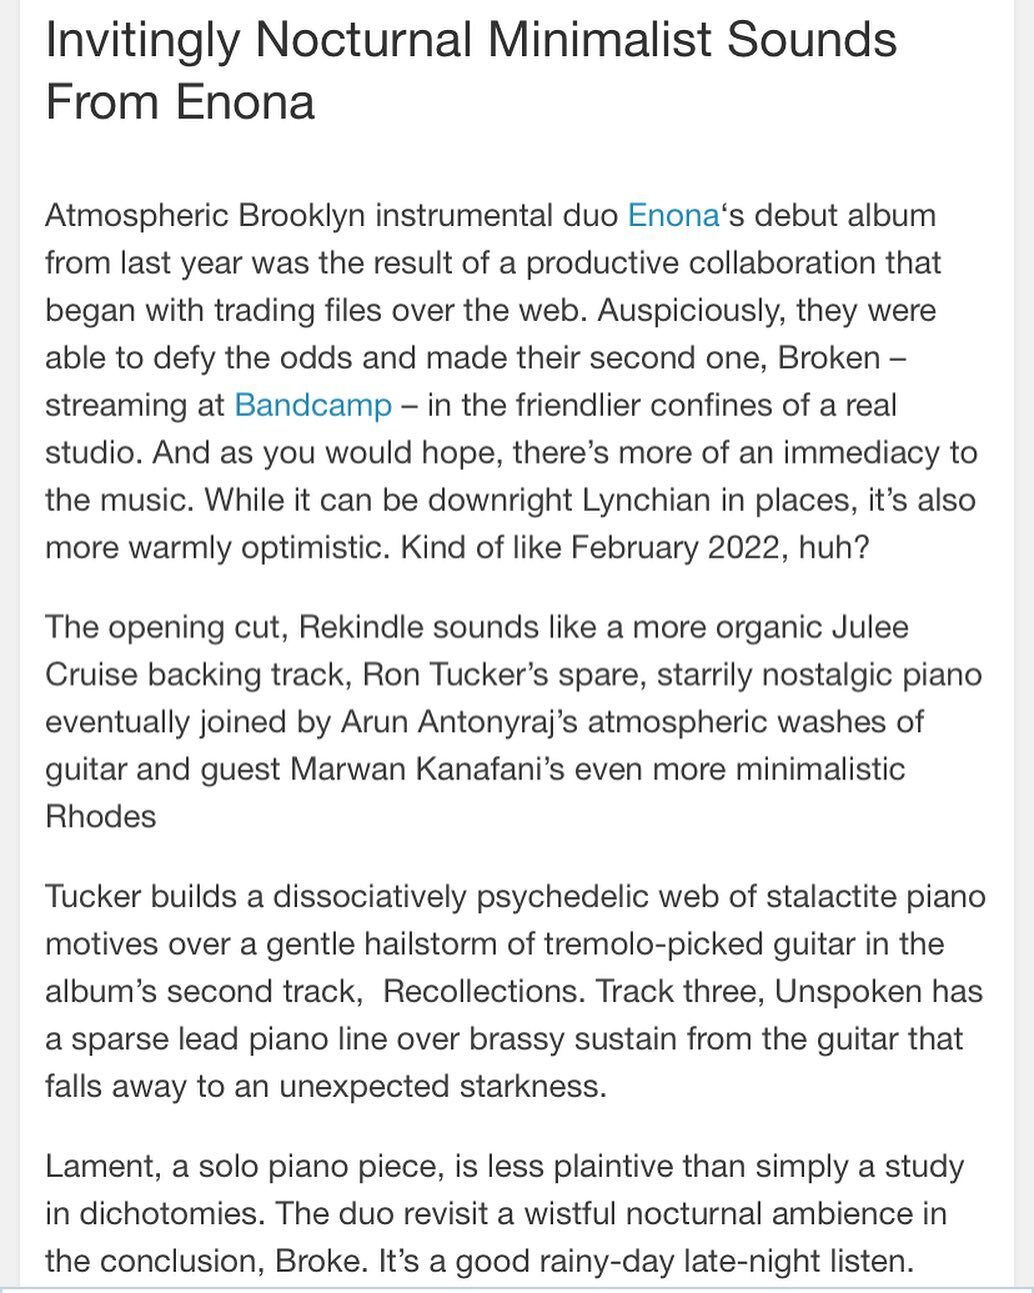 &ldquo;&hellip;dissociatively psychedelic web of stalactite piano motives over a gentle hailstorm of tremolo-picked guitar..&rdquo; -New York Music Daily